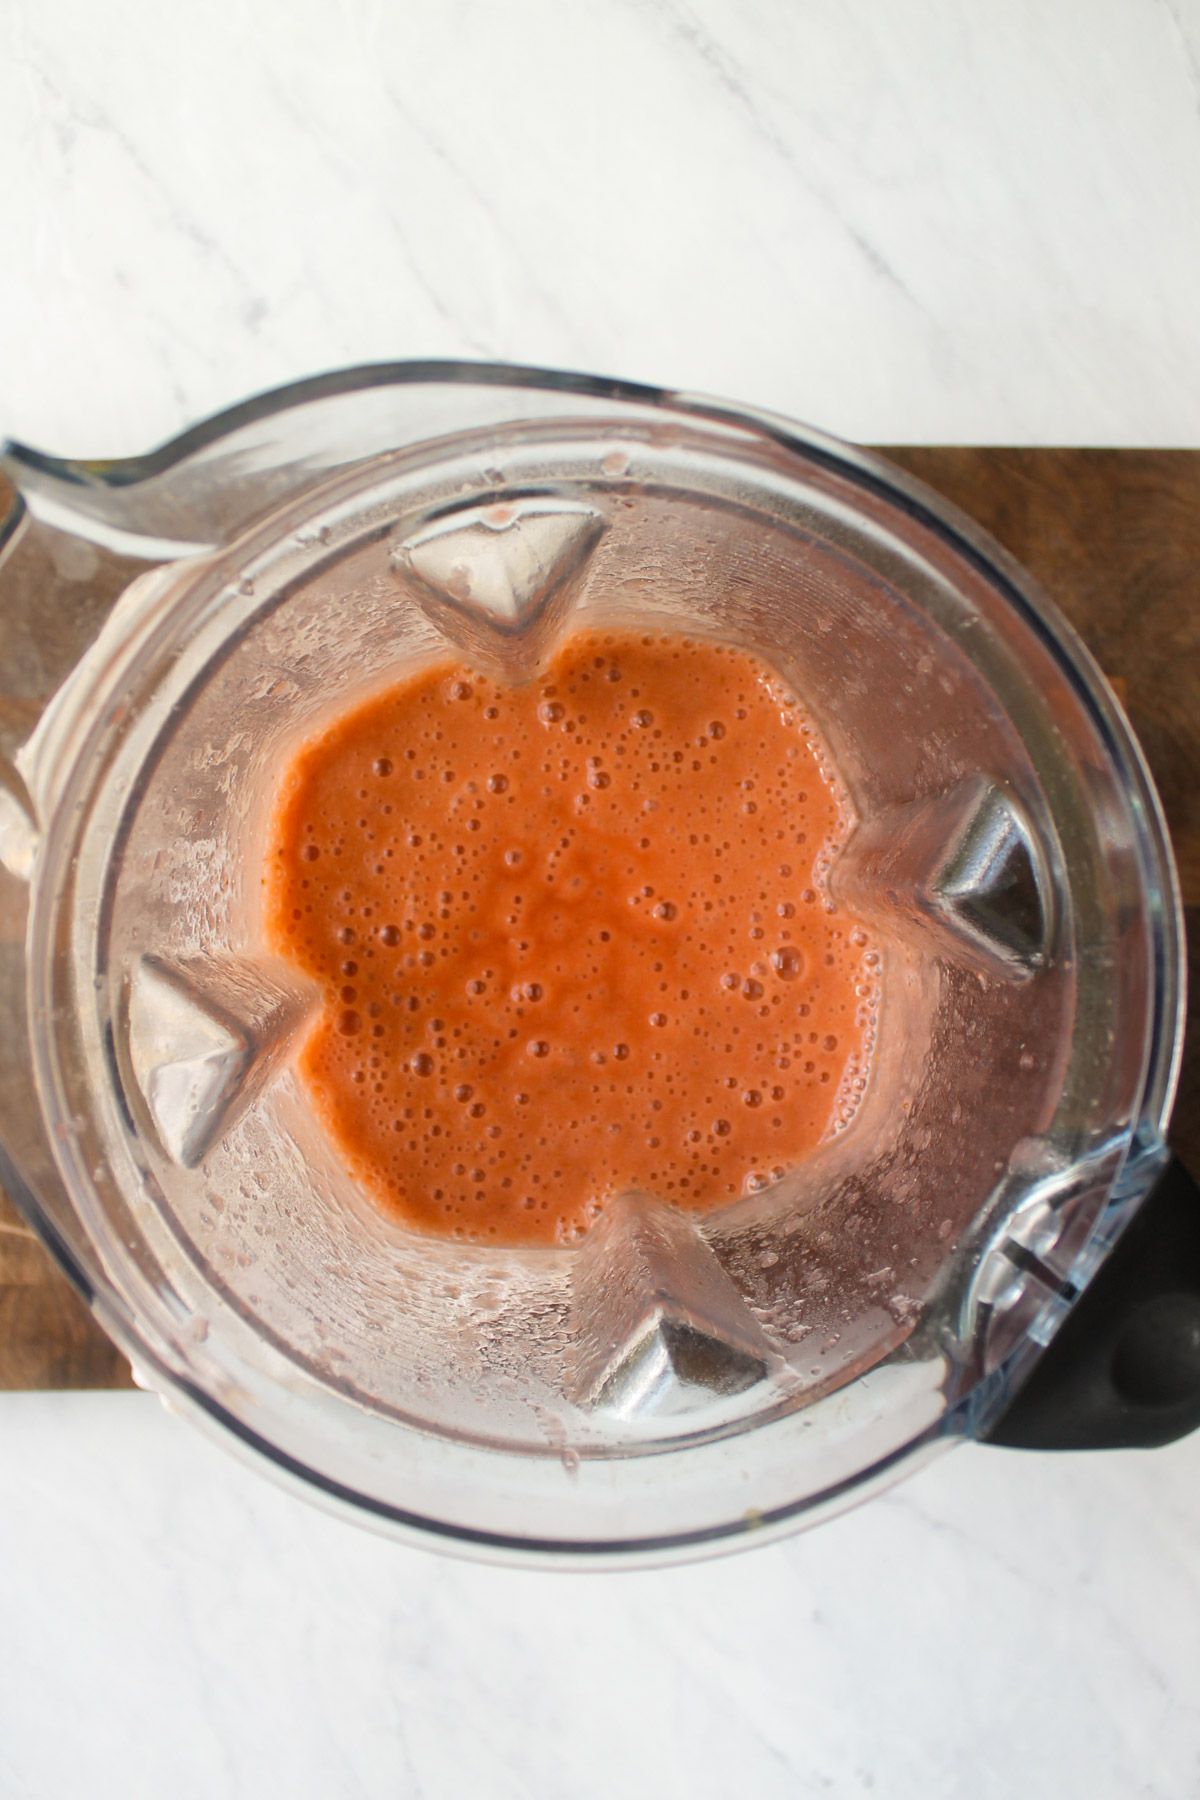 Strawberry rhubarb sauce pureed in a blender.